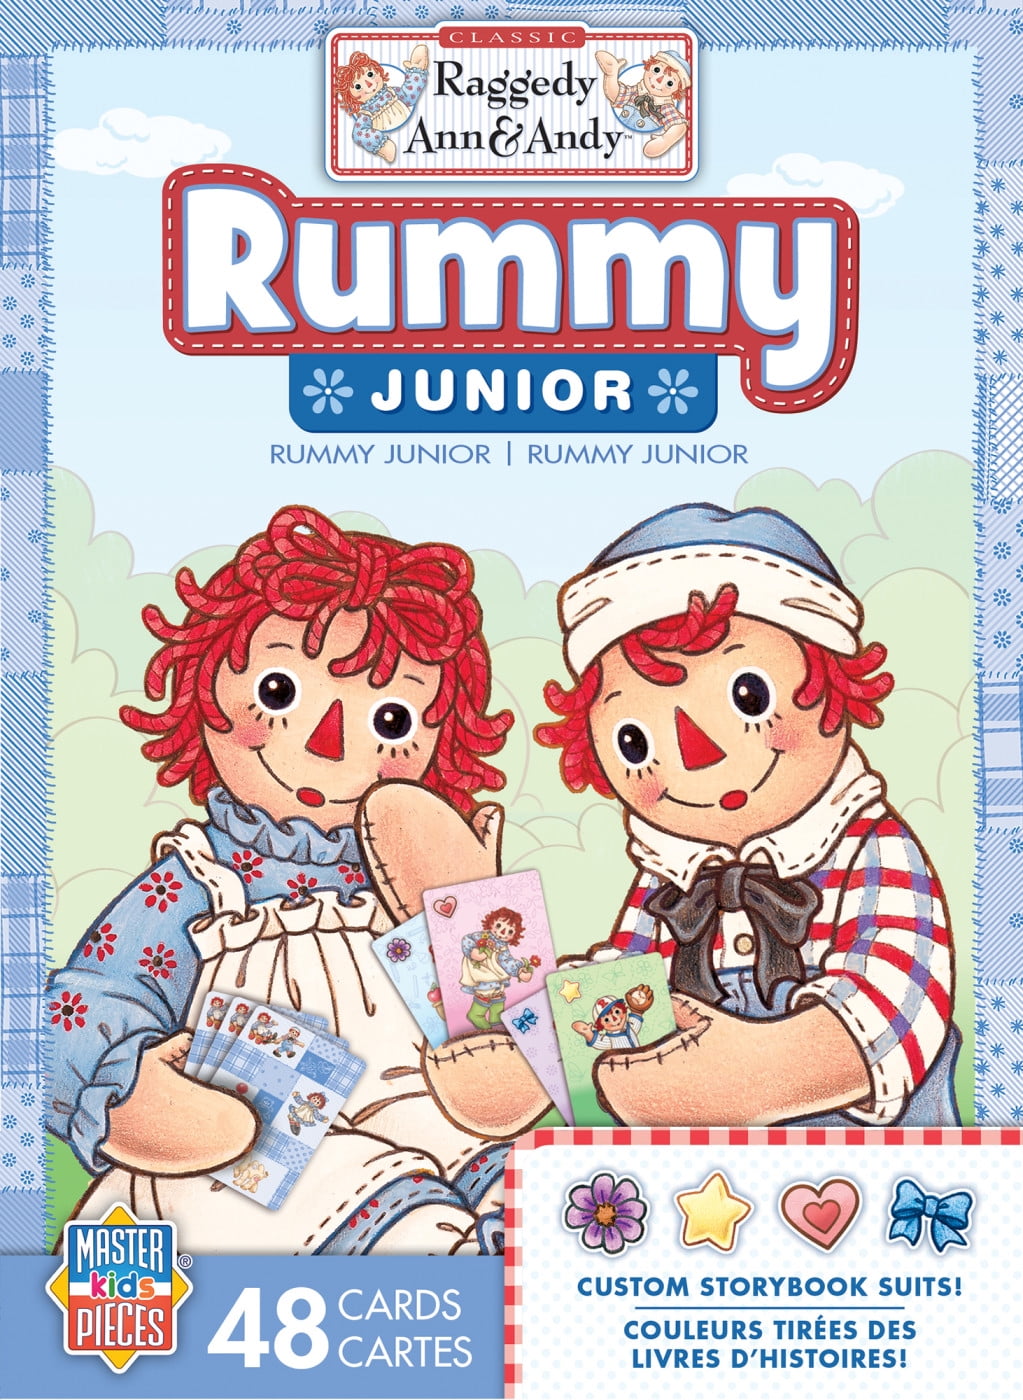 MasterPieces Kids Games - Raggedy Ann and Andy - Rummy Junior Card Game 